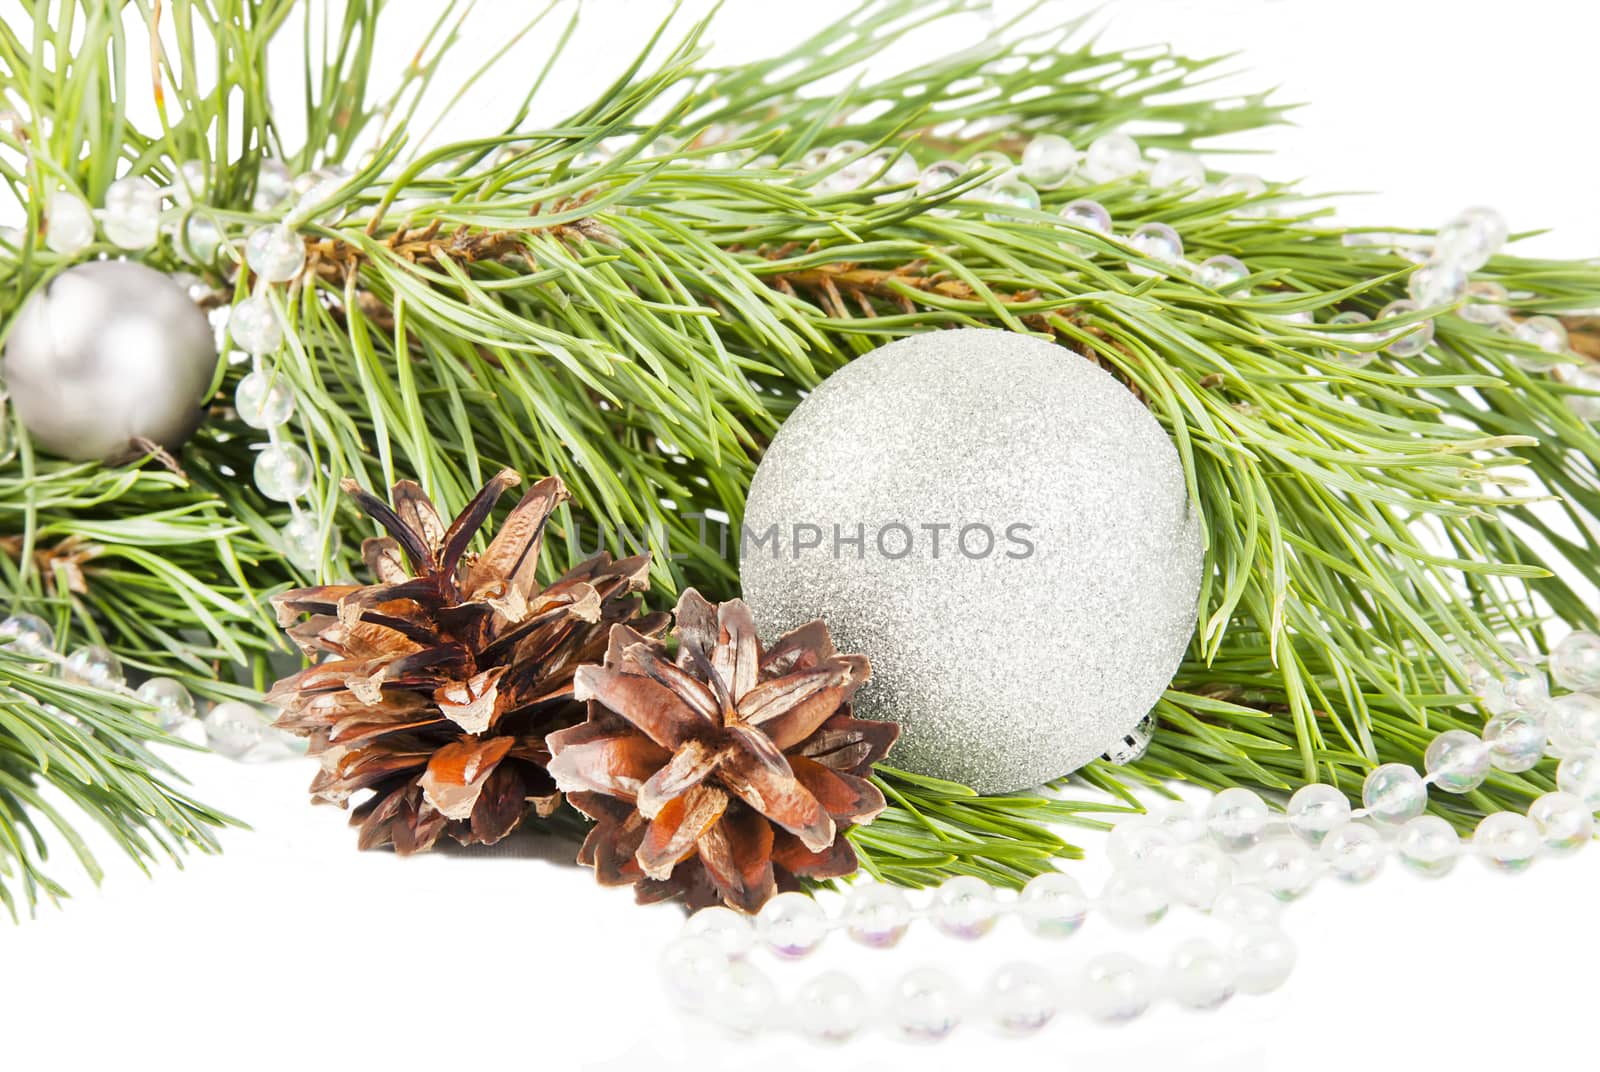 New year composition with fir tree, cones and silver ball by RawGroup